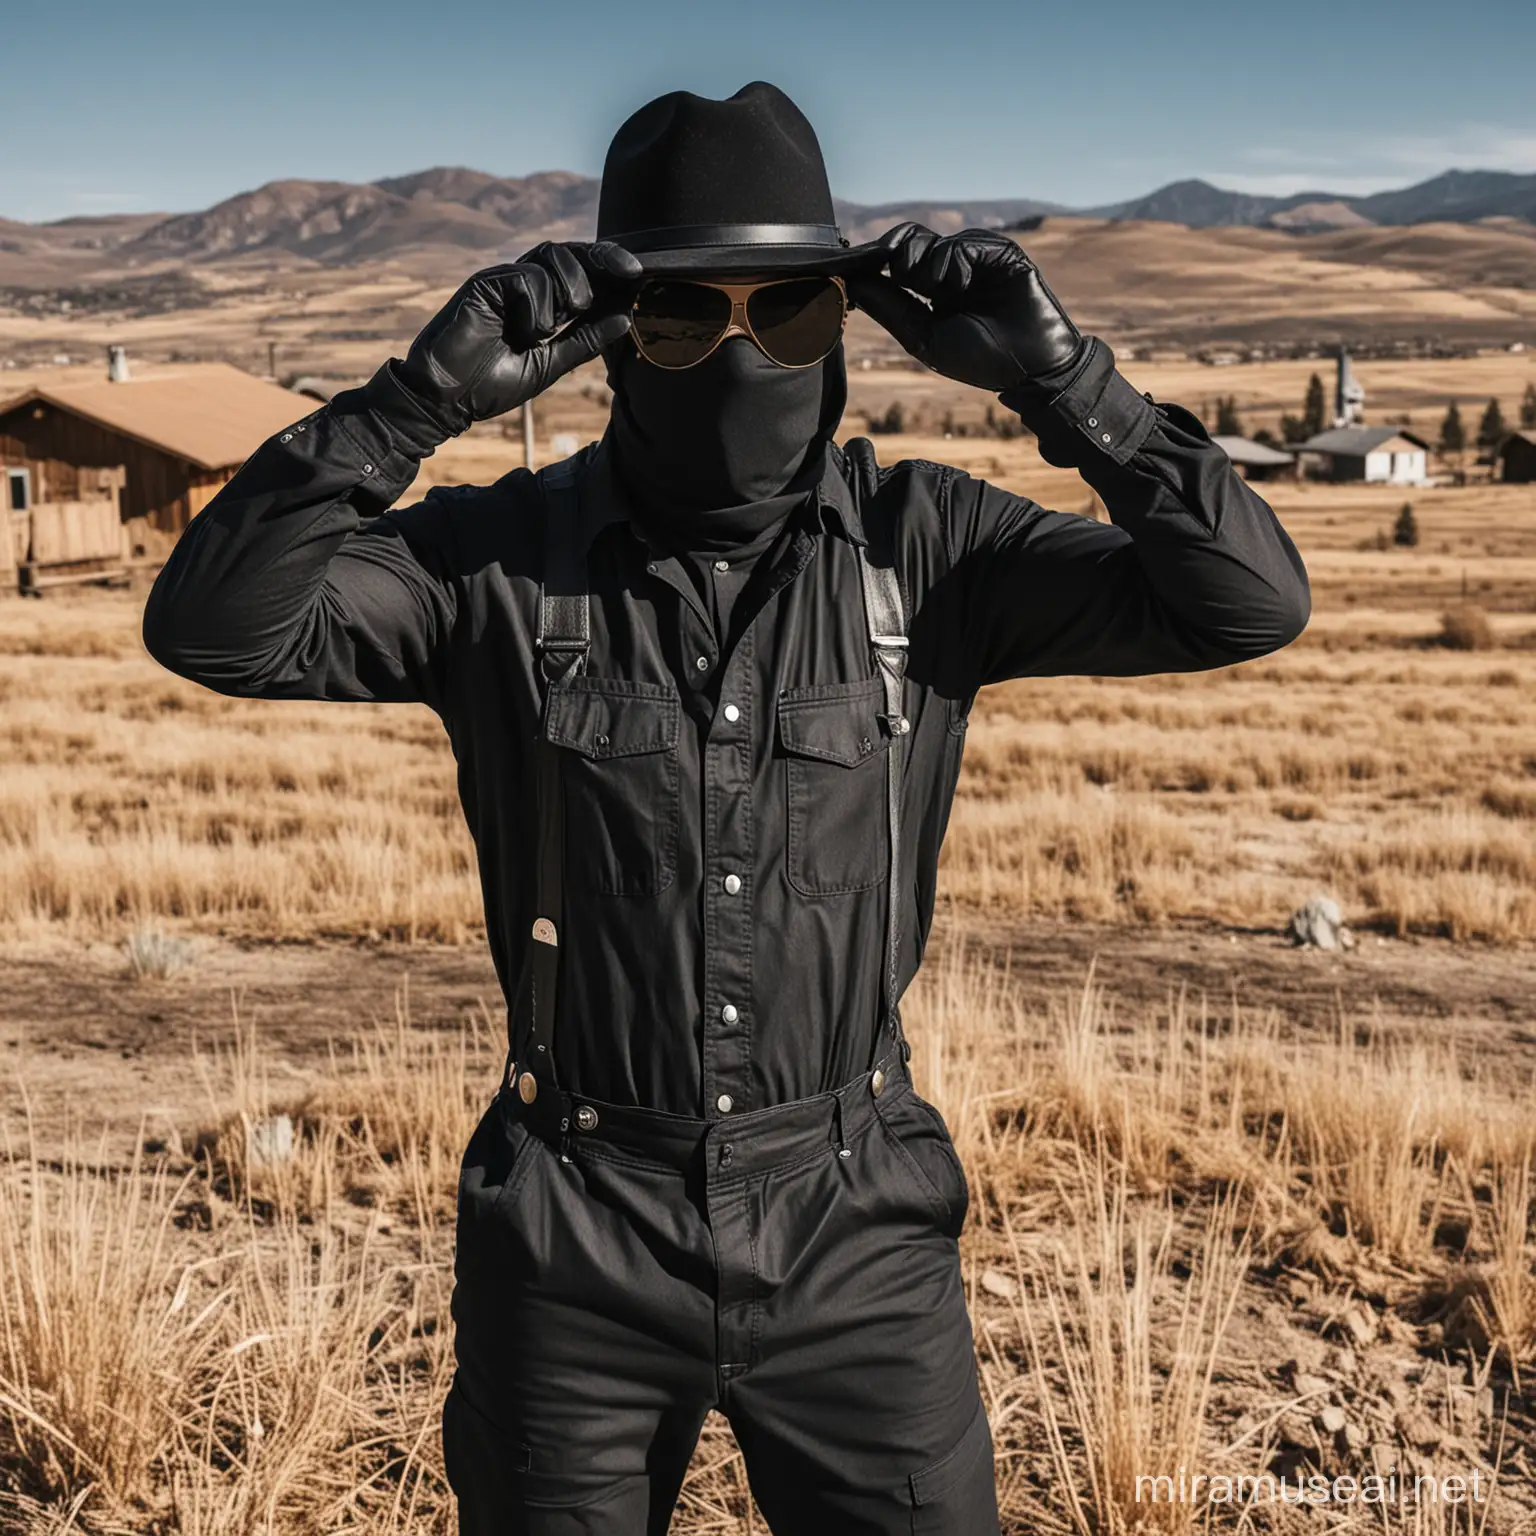 a guy in a cowboy overalls, with a ski mask covering his full face, using a sun glass above the ski mask, using a cowboy hat, in a rural area, making signals with hands, using black gloves, all black clothes